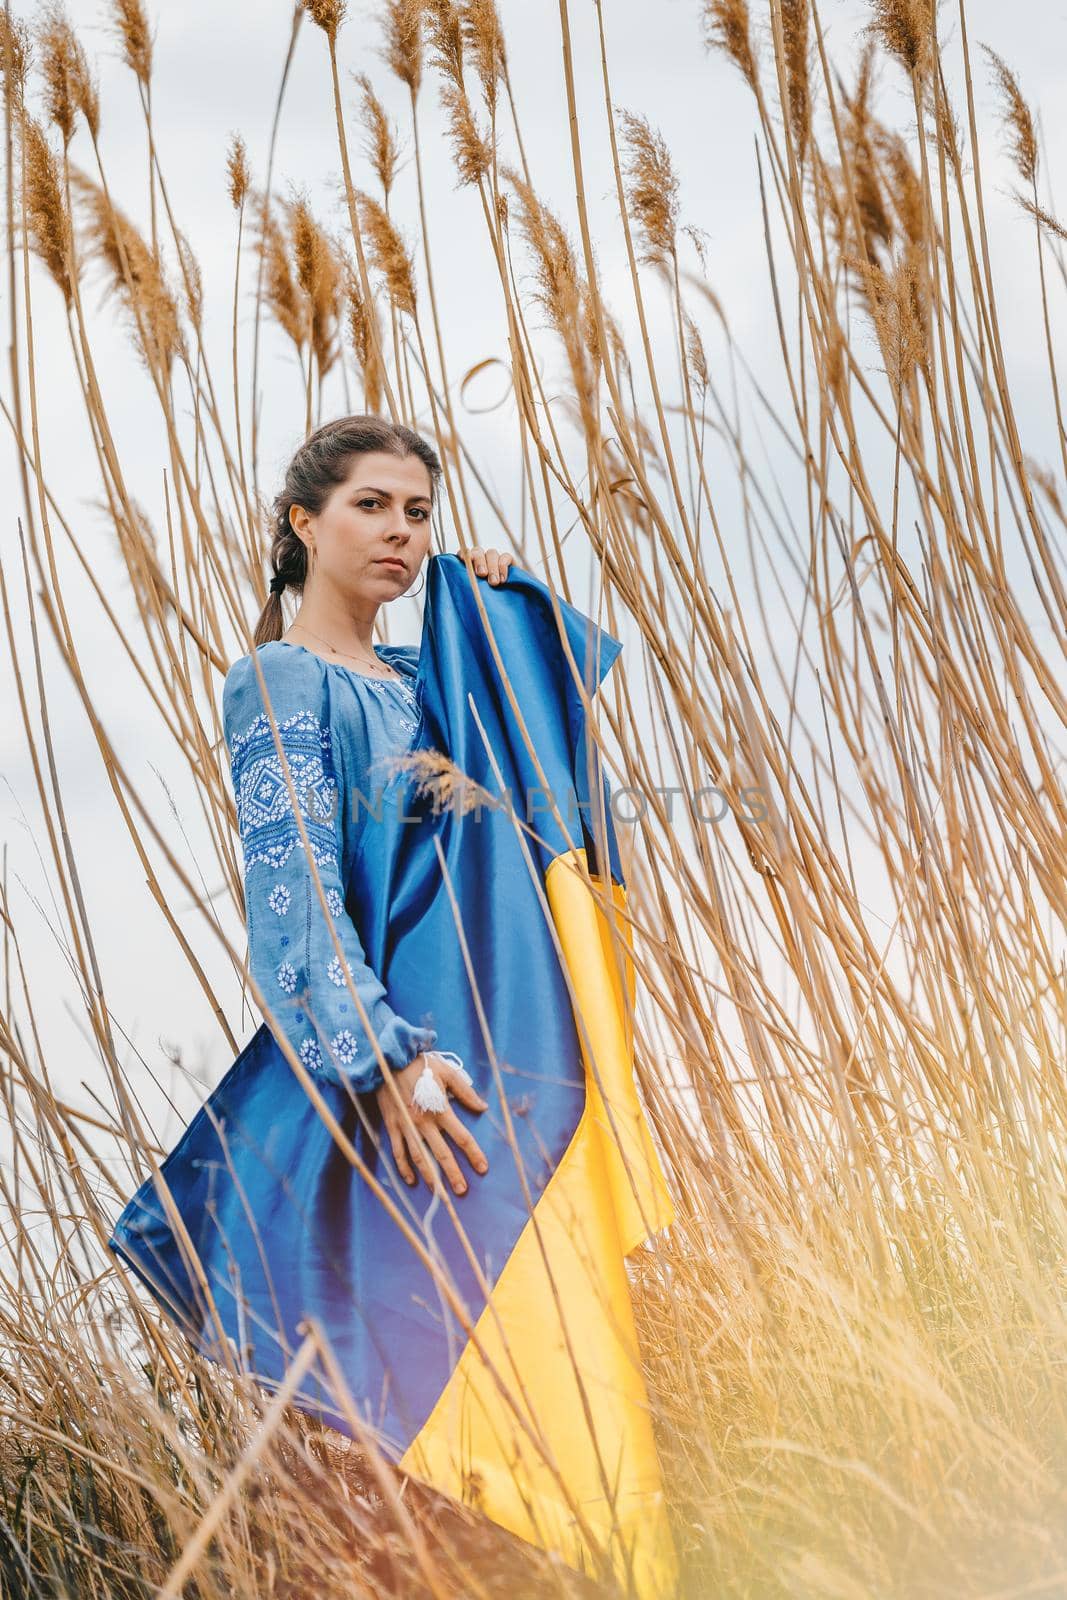 Sorrowful ukrainian woman with national flag on natural reeds background. Lady in blue embroidery vyshyvanka blouse. Ukraine, independence, freedom, patriot symbol, victory in war. High quality photo